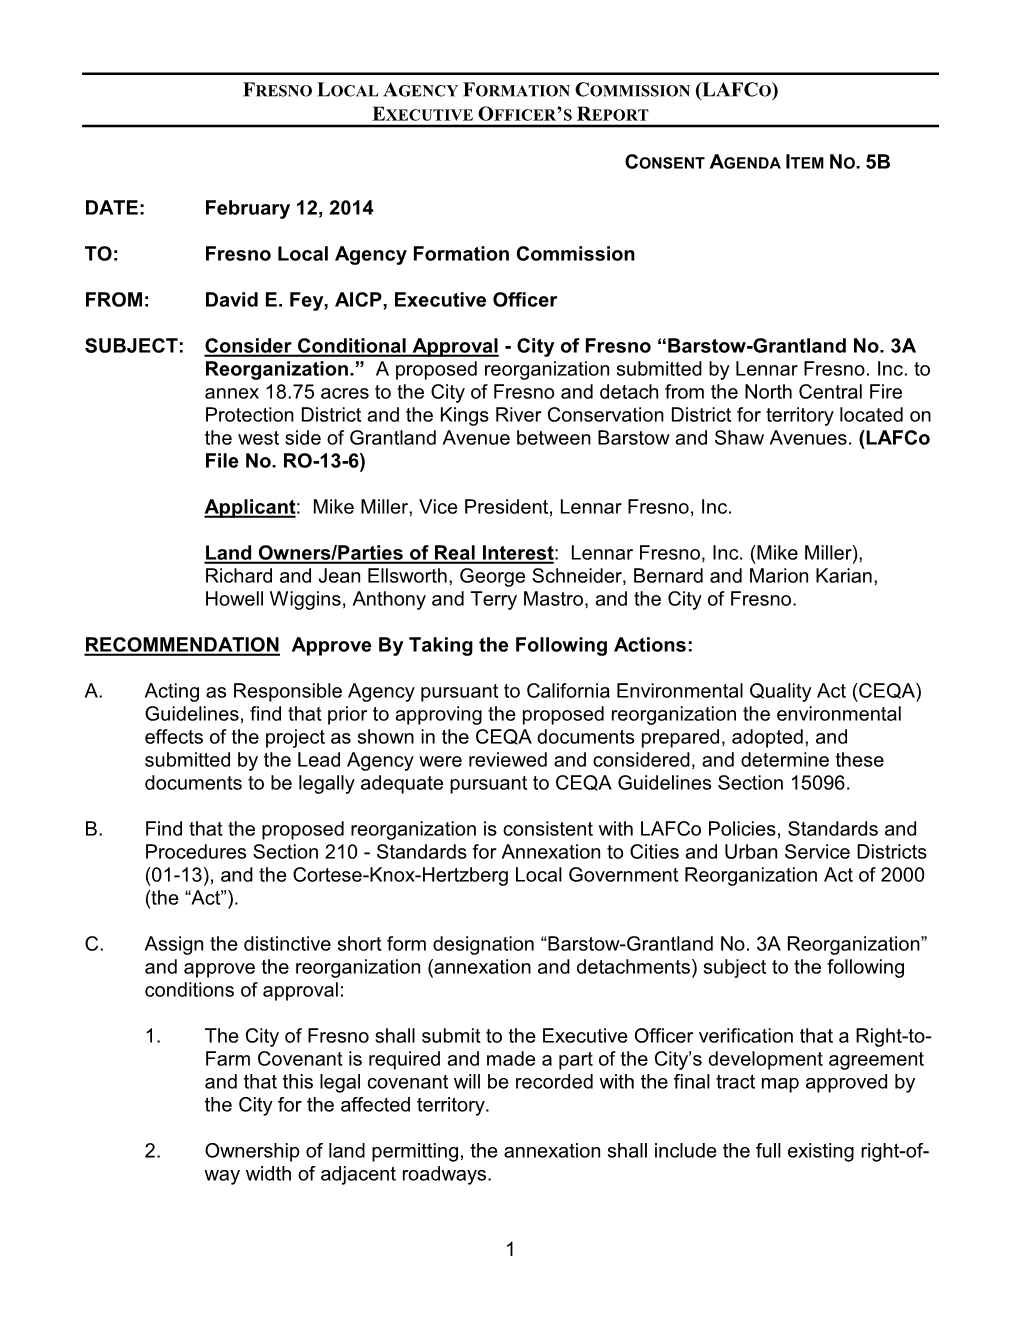 Fresno Local Agency Formation Commission (Lafco) Executive Officer’S Report